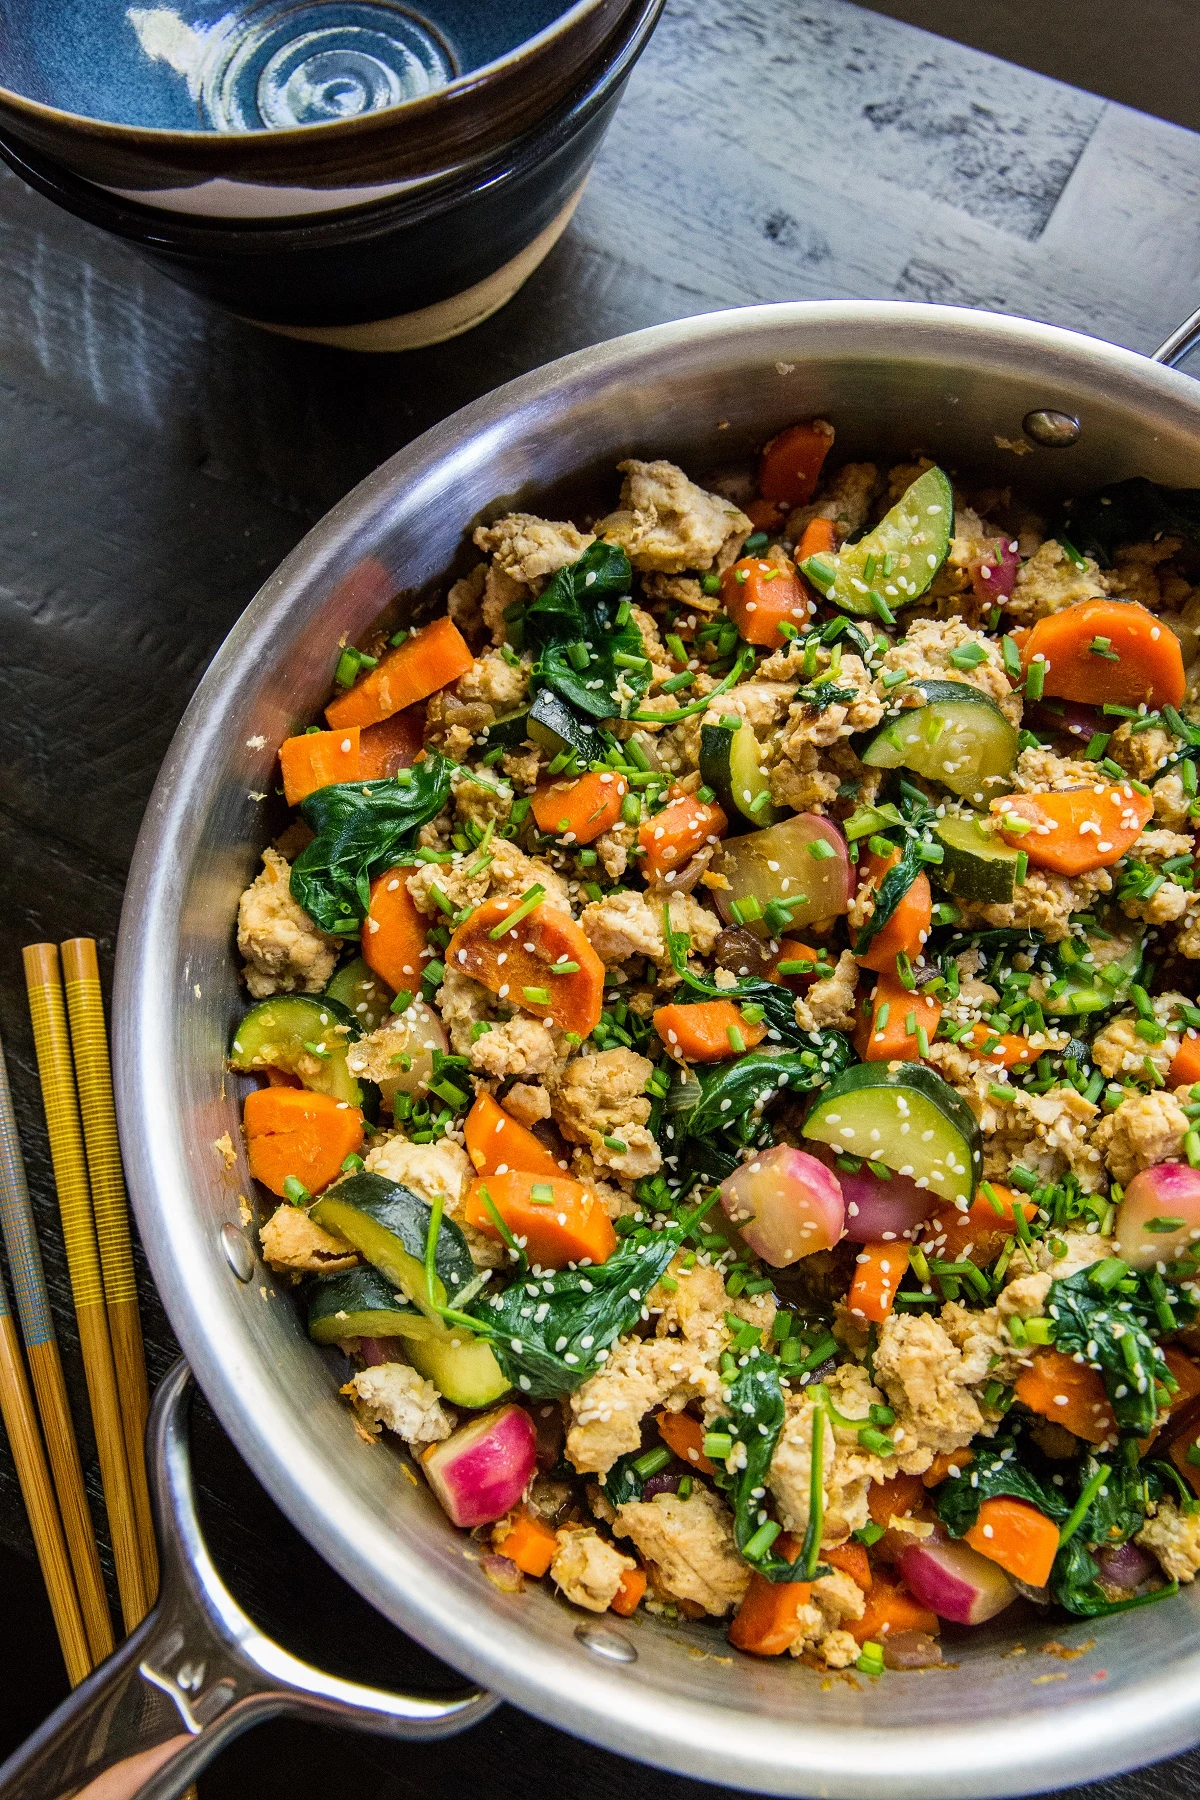 Teriyaki Ground Turkey Skillet with Vegetables - an easy, low-carb, paleo, keto dinner recipe ready in under 45 minutes | TheRoastedRoot.net